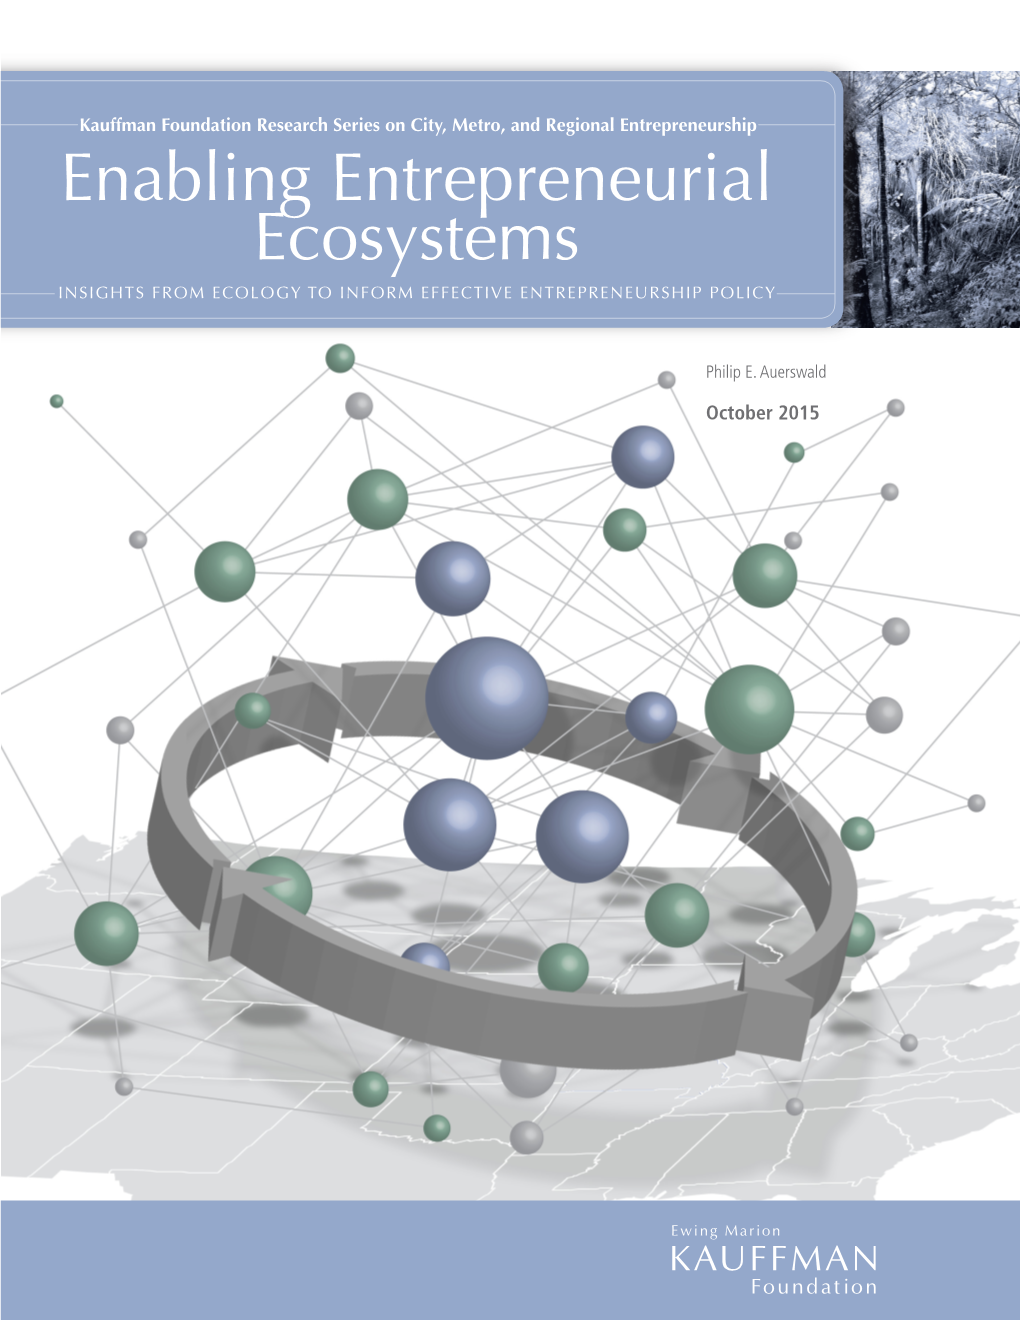 Enabling Entrepreneurial Ecosystems Insights from Ecology to Inform Effective Entrepreneurship Policy